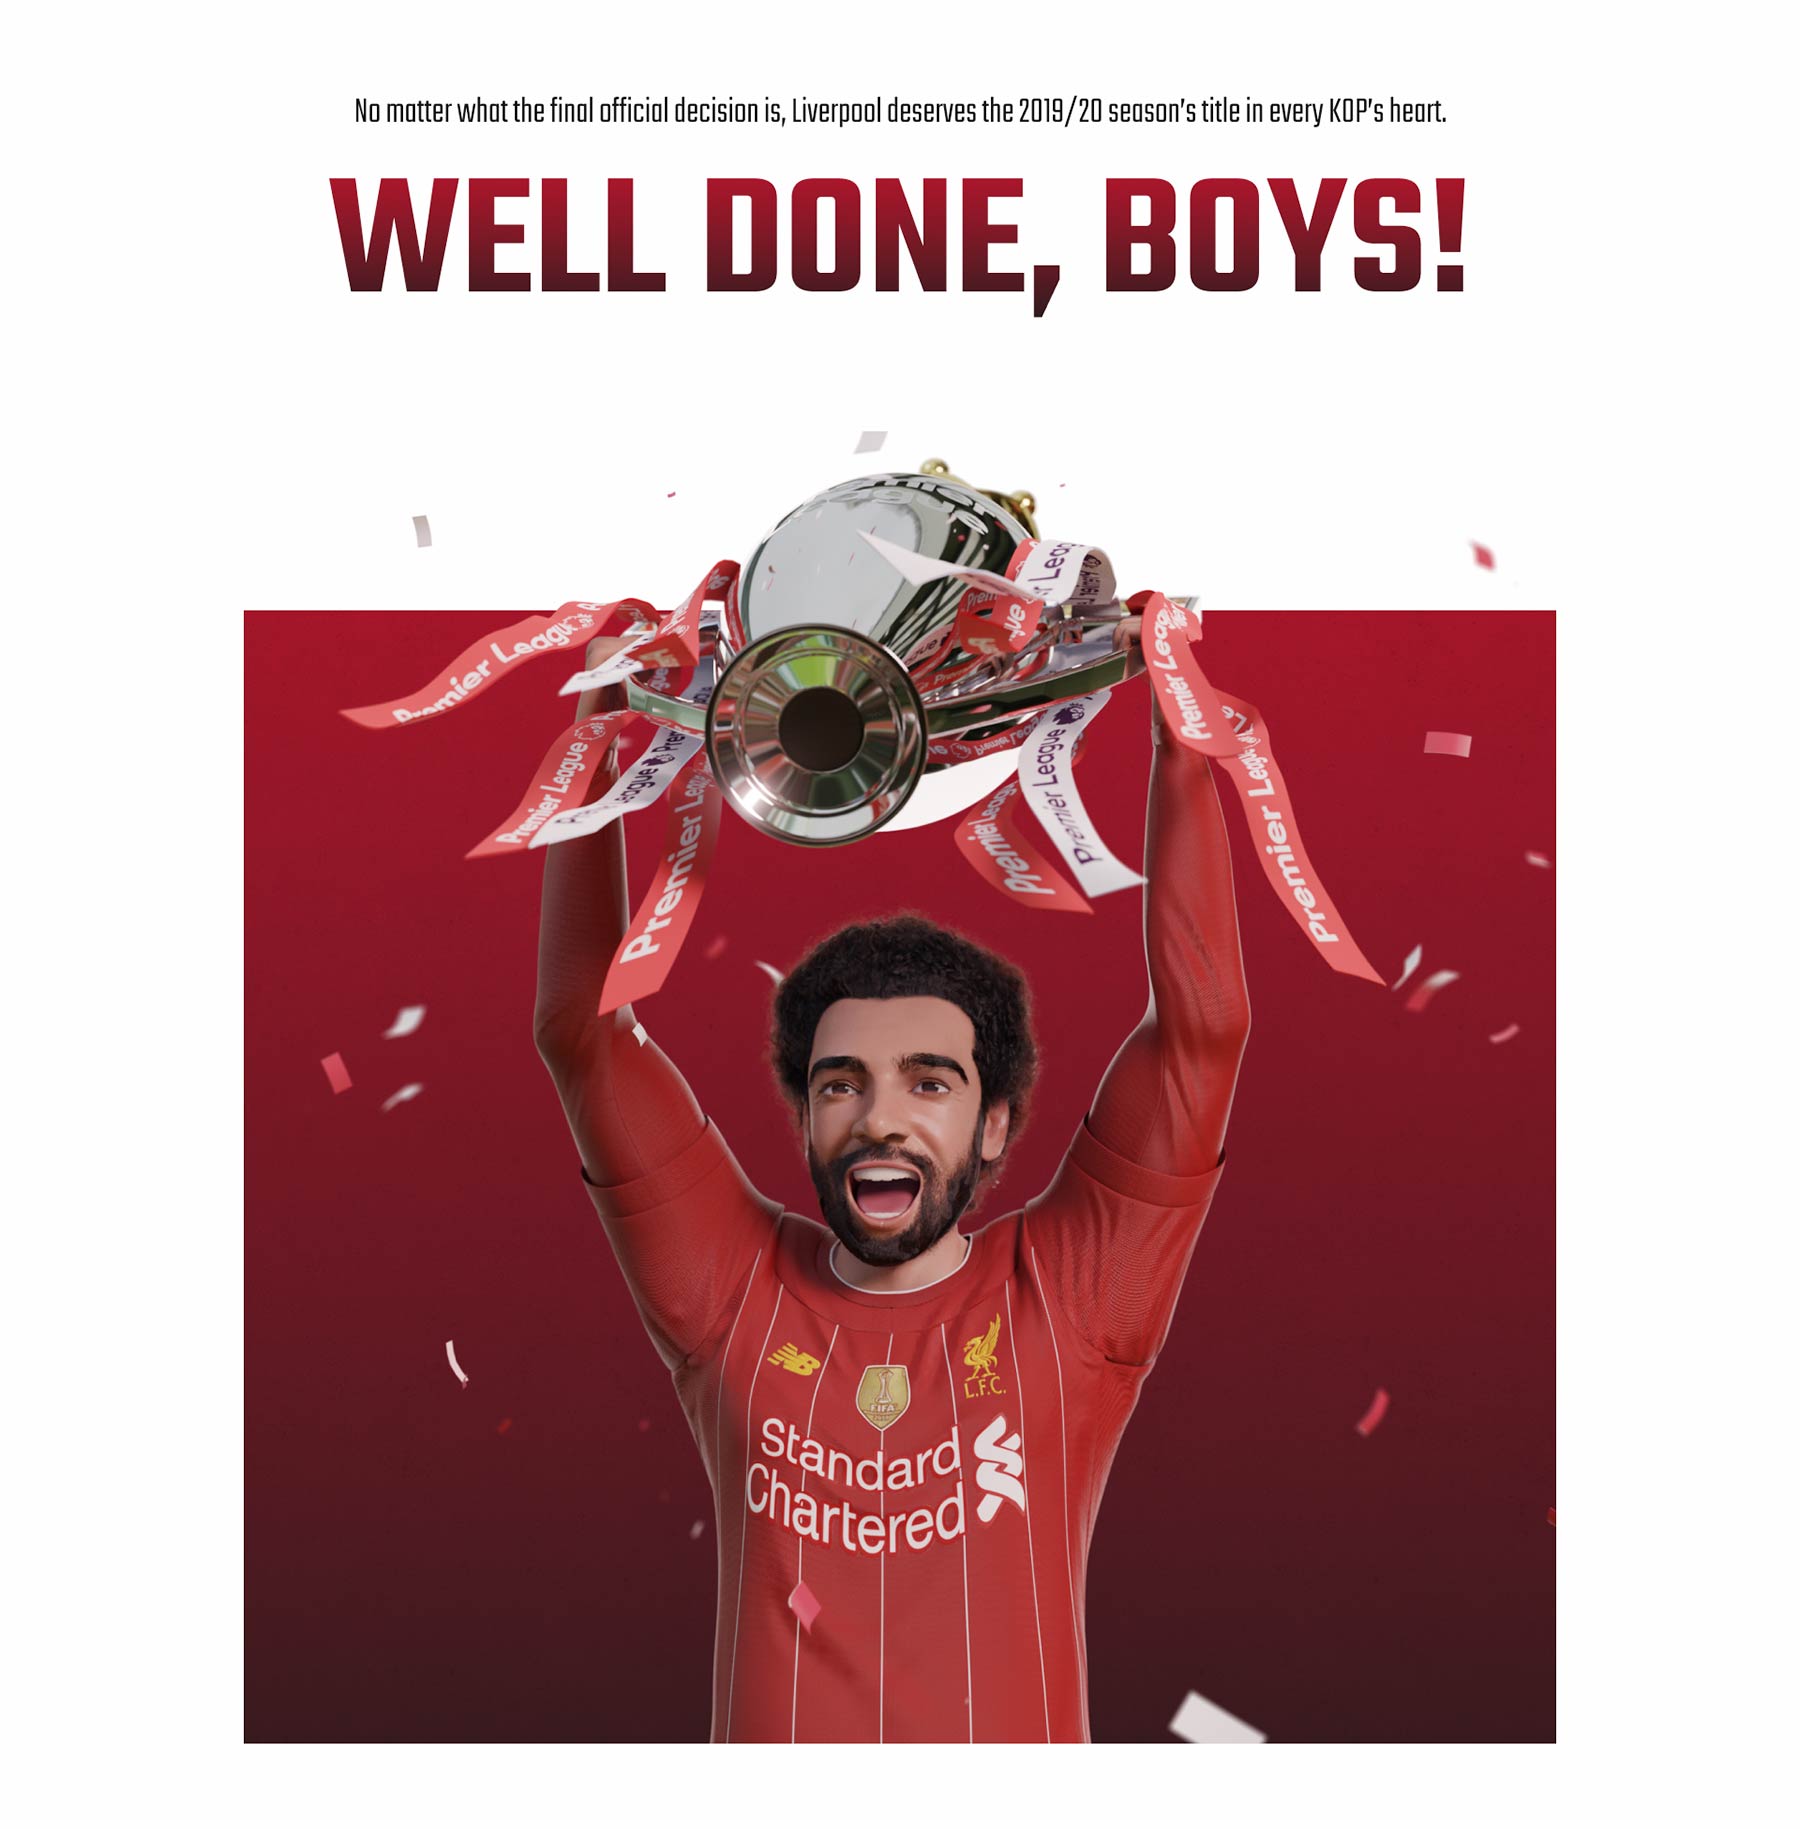 Salah Character Holding the Premier League Cup High